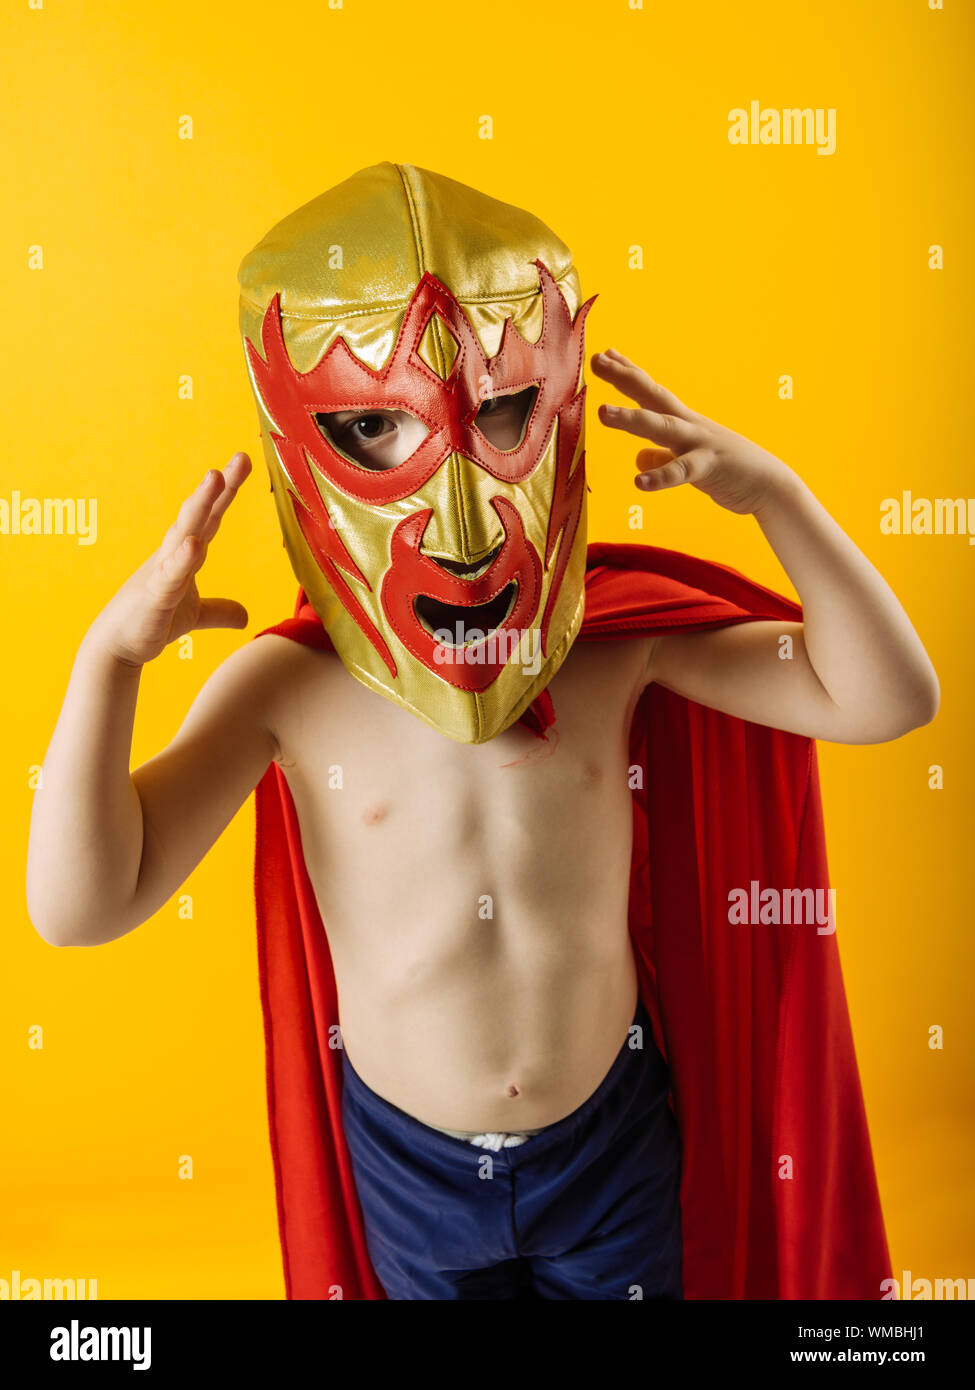 Photograph of a 4 year-old dressed as a Mexican wrestler or Luchador. Stock Photo